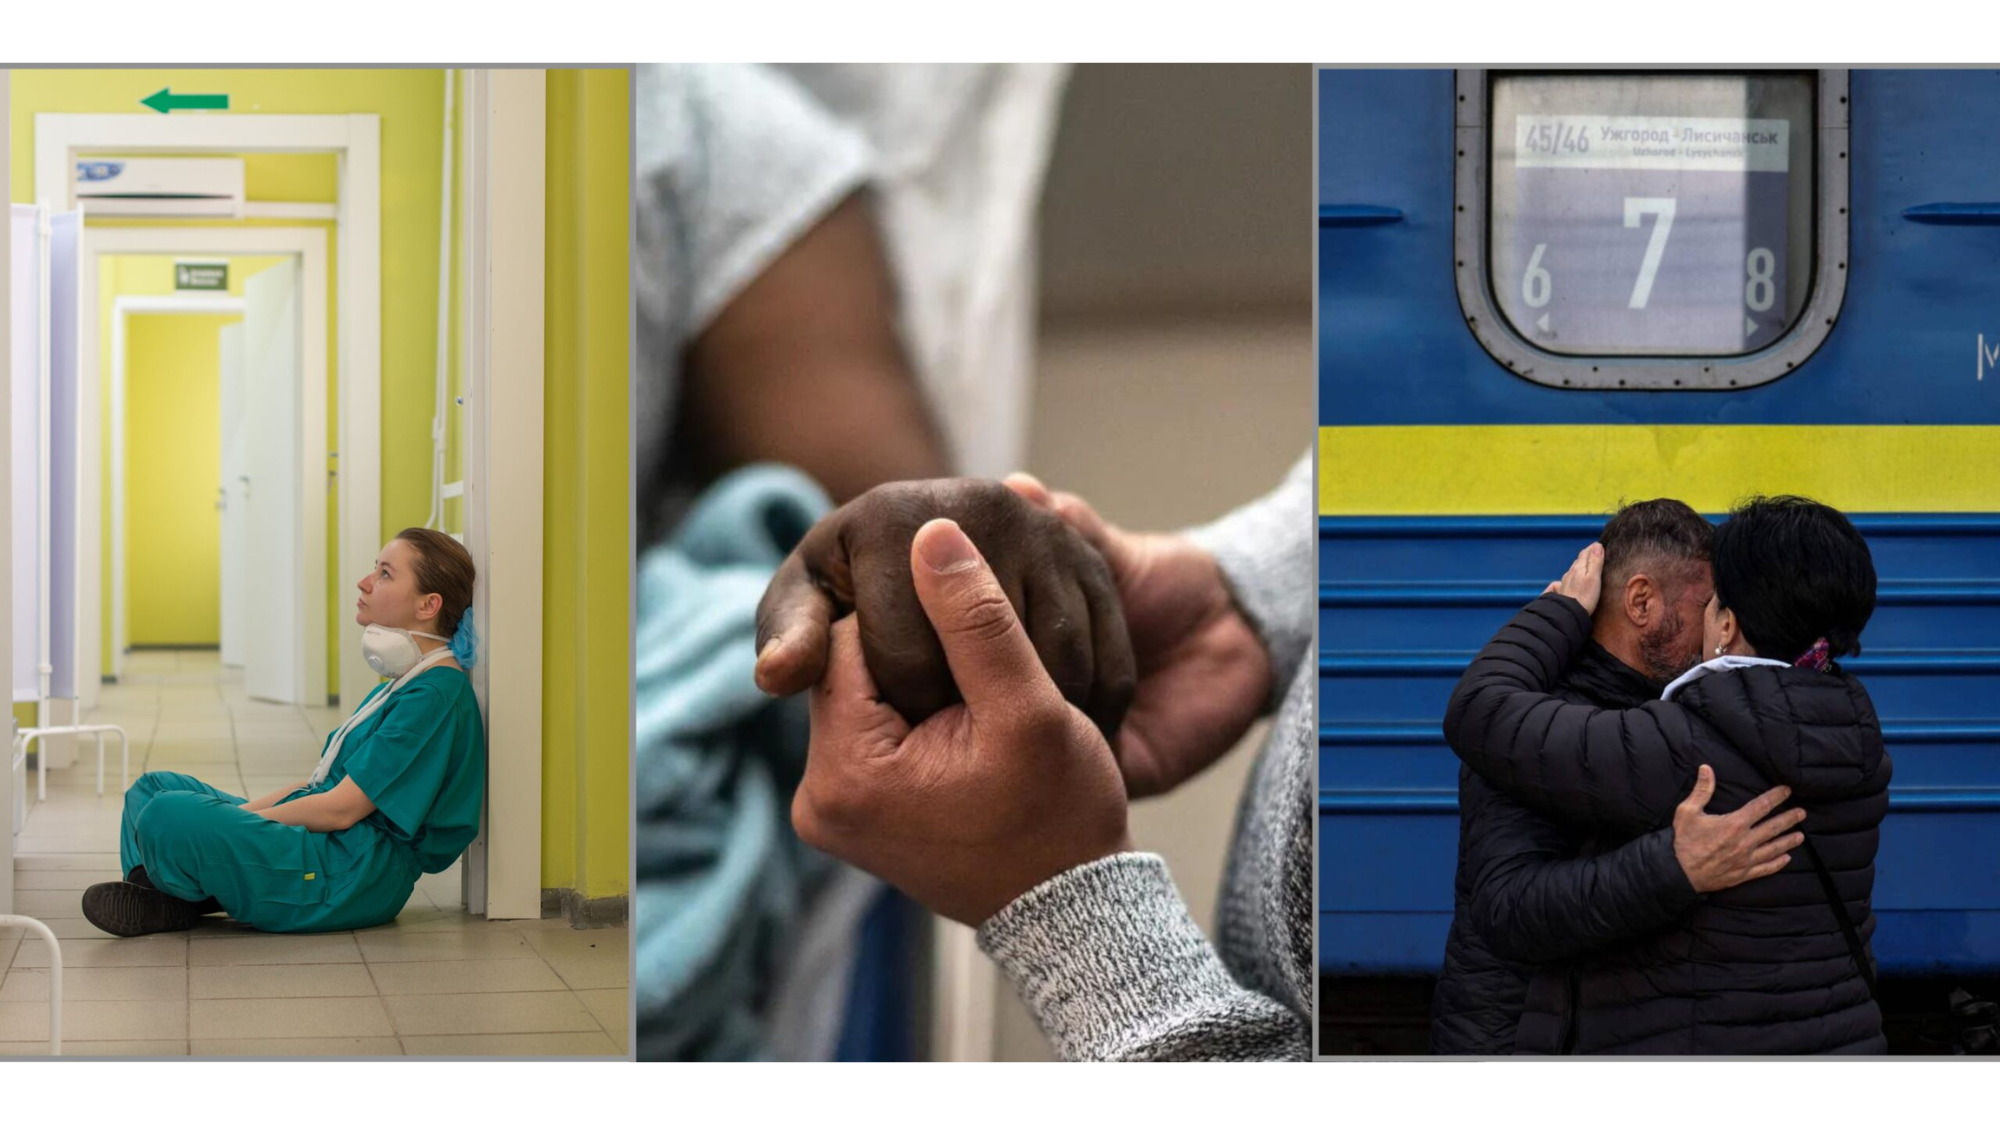 Three photos: 1) A tired female doctor sits cross-legged in a hospital corridor with a face mask pulled down. 2) A woman&#039;s hands clasp the hands of a hospital patient in a bed. 3) A couple embraces in front of a blue and yellow train in Kyiv, Ukraine.